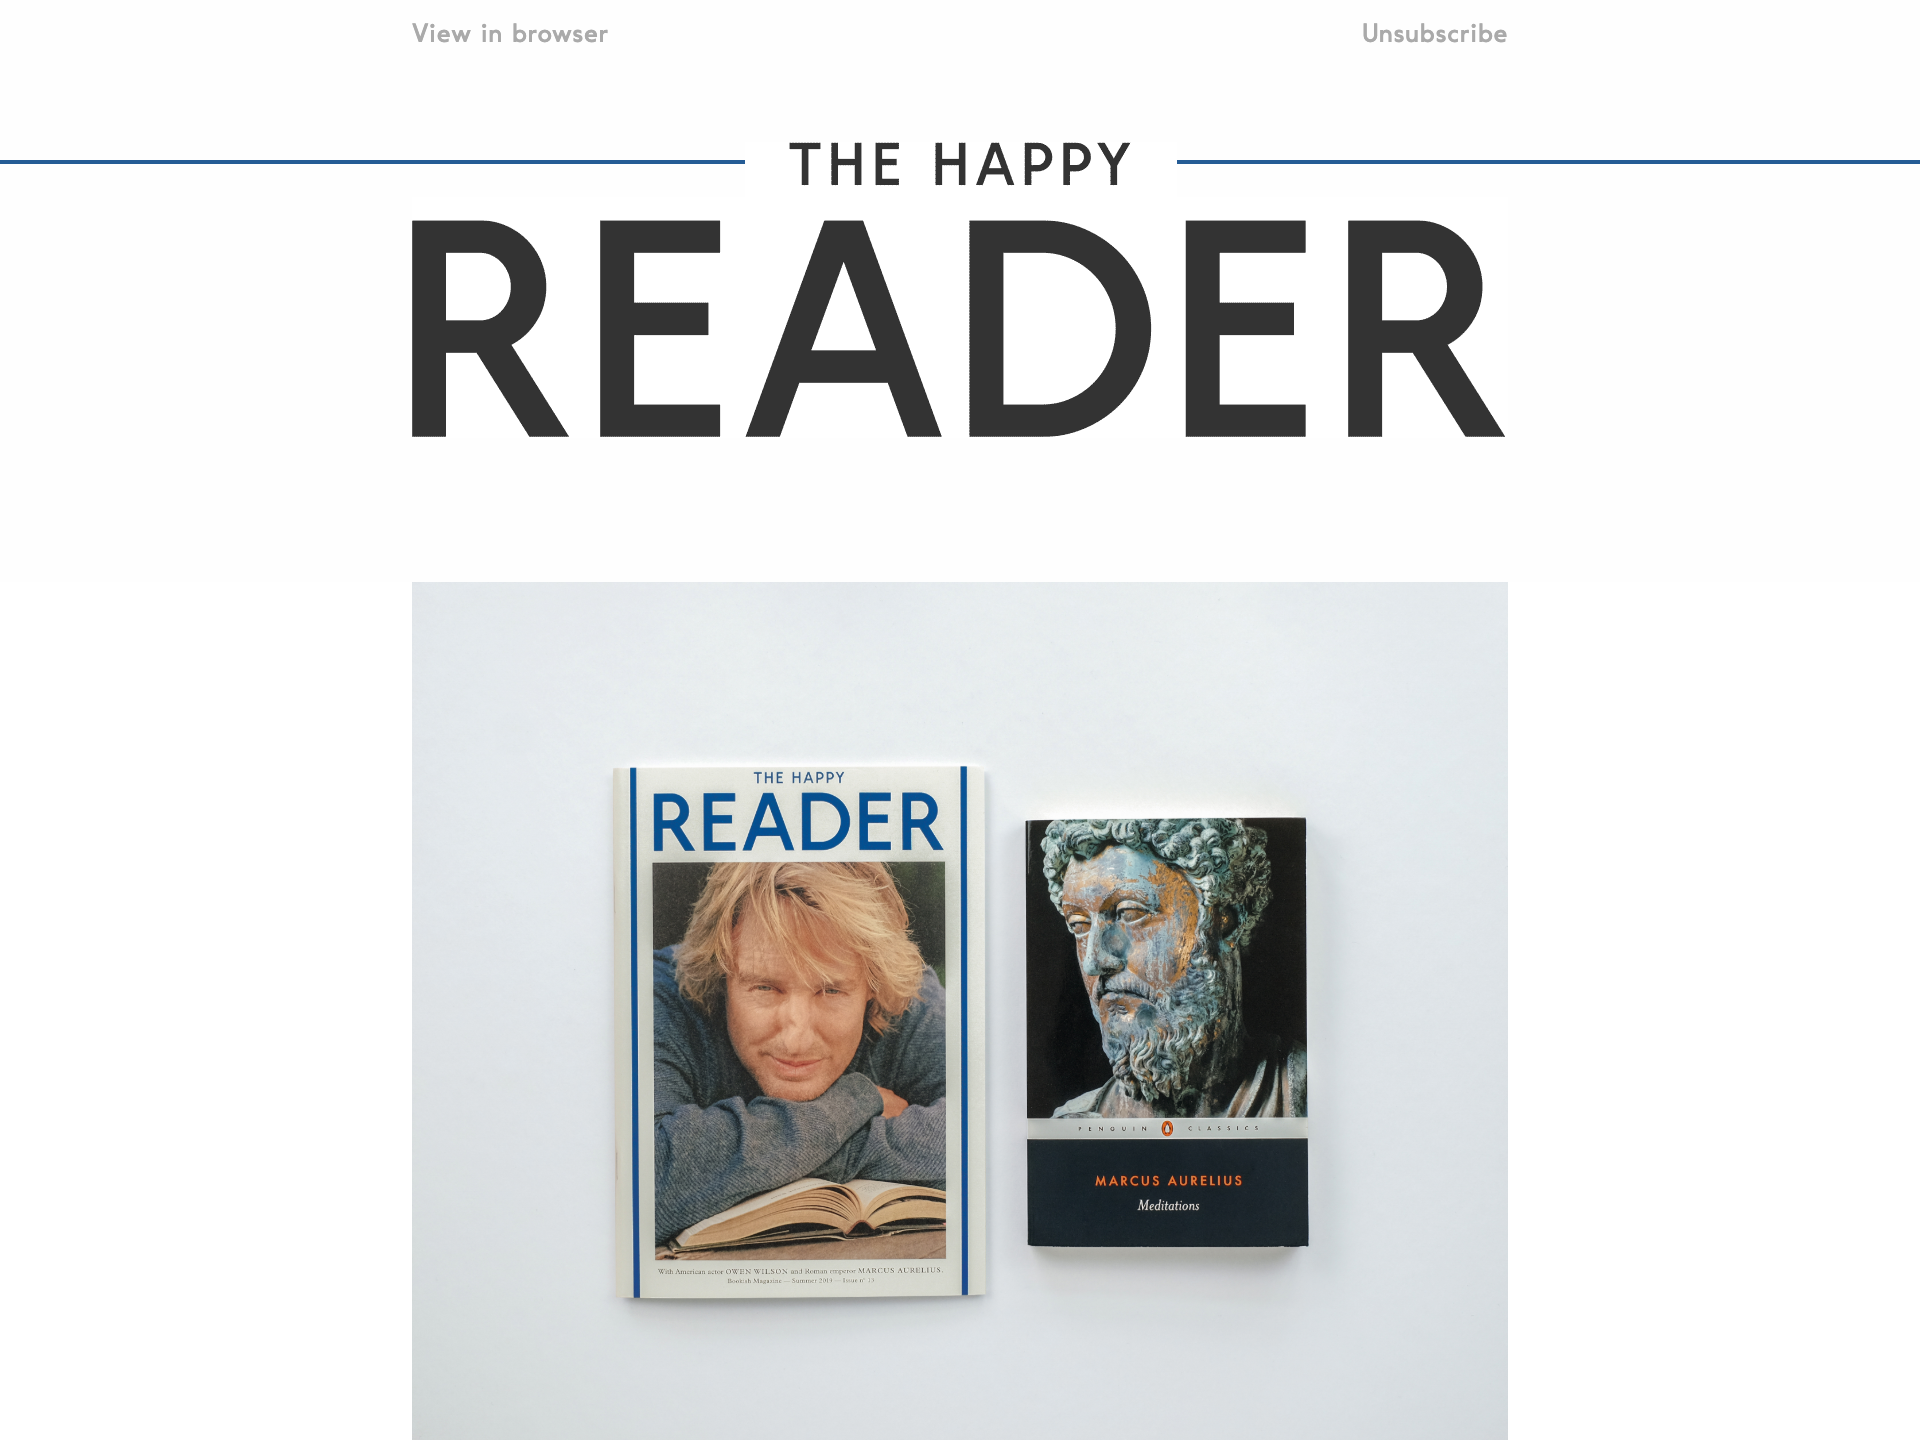 The Happy Reader template